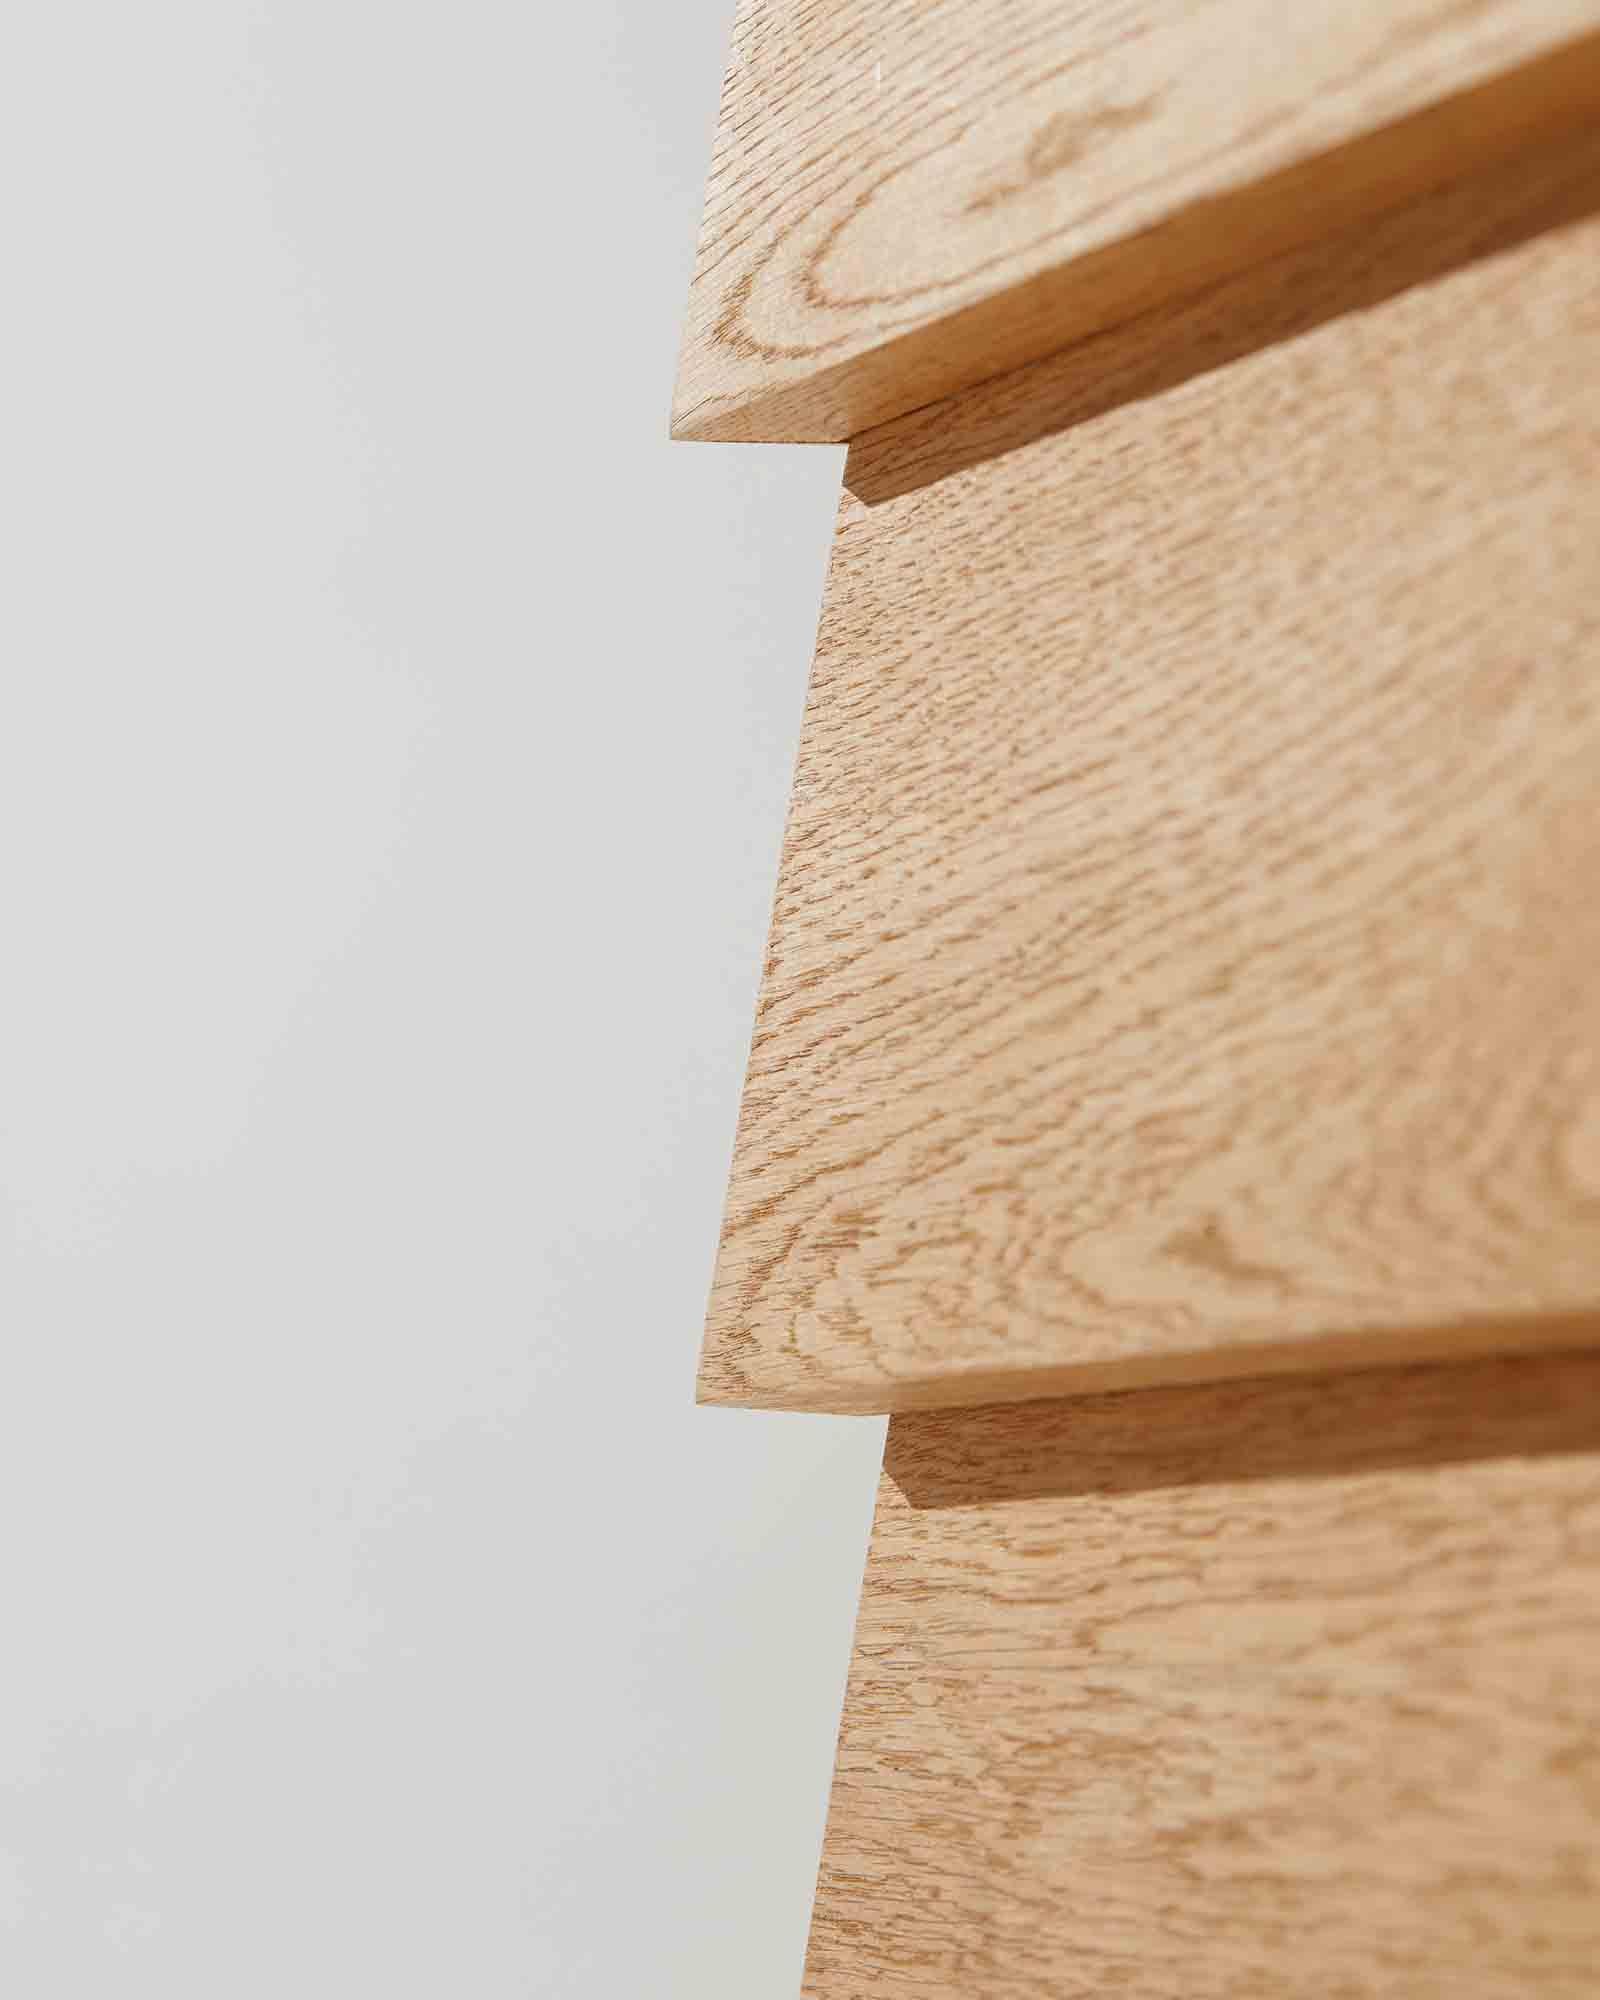 PAGODE breathes the austere aesthetics and warm feel-good atmosphere of the Japanese furnishing style. Kanzo, Shizen and Seijaku, simplicity, naturalness and tranquillity characterise the oak stool, which is formally reminiscent of the building